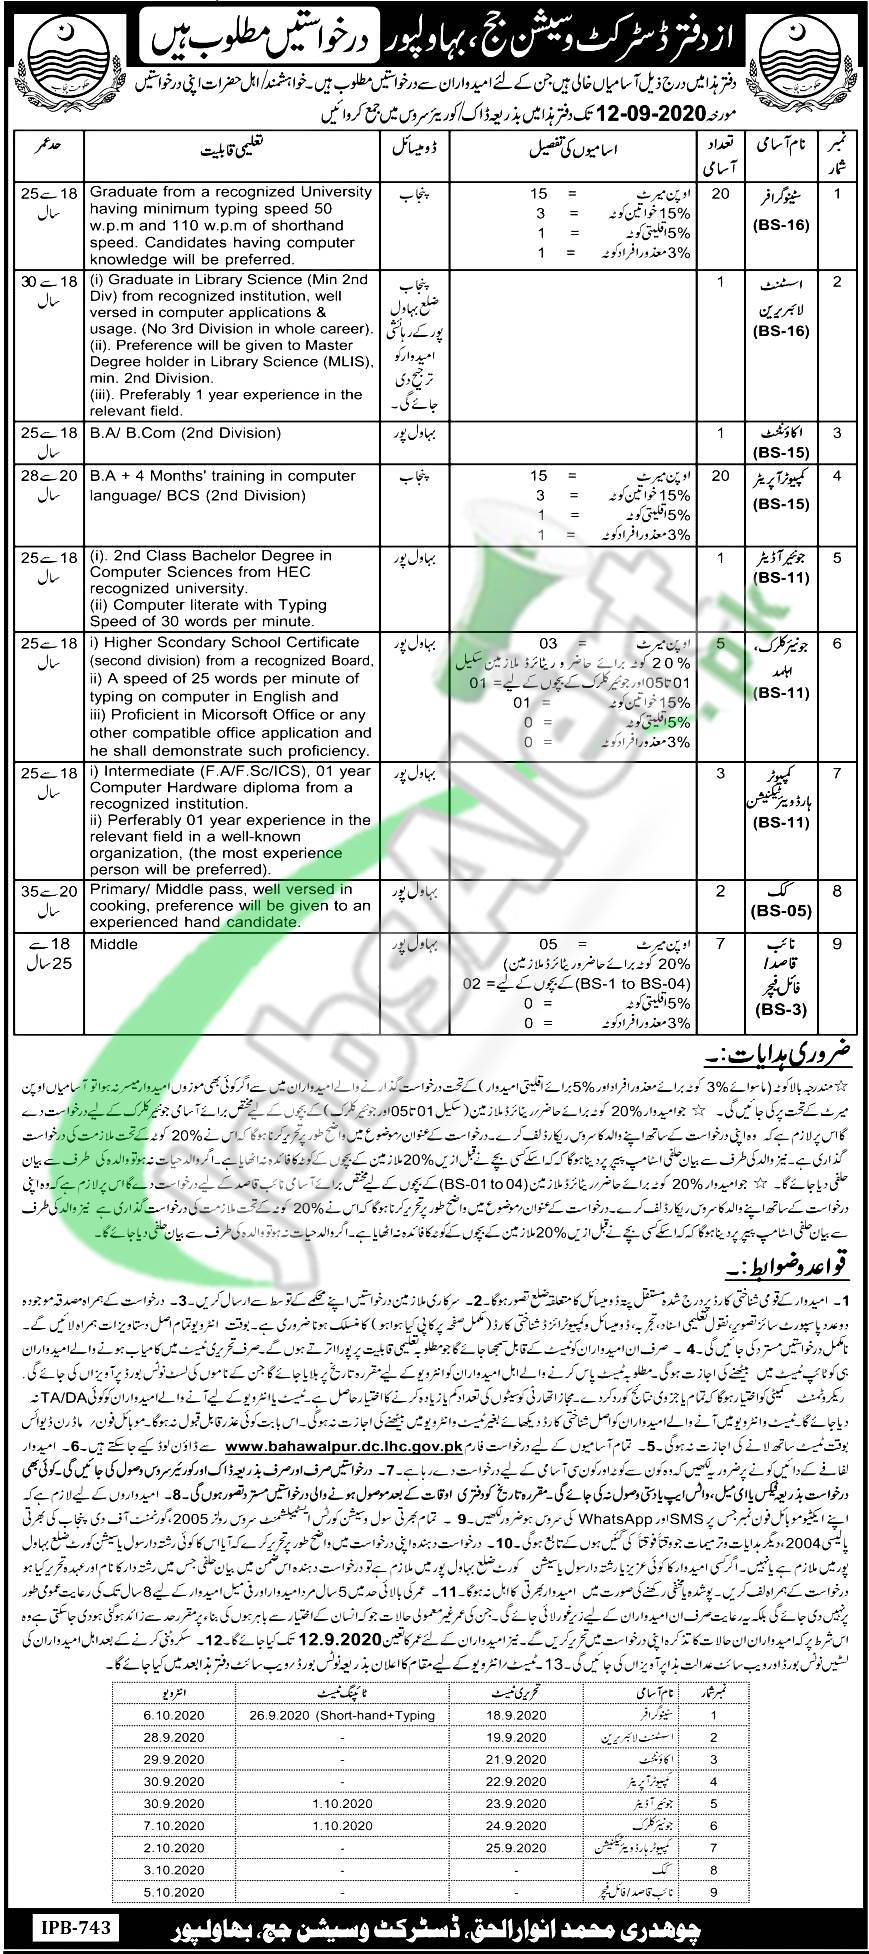 District and Session Court Bahawalpur Jobs